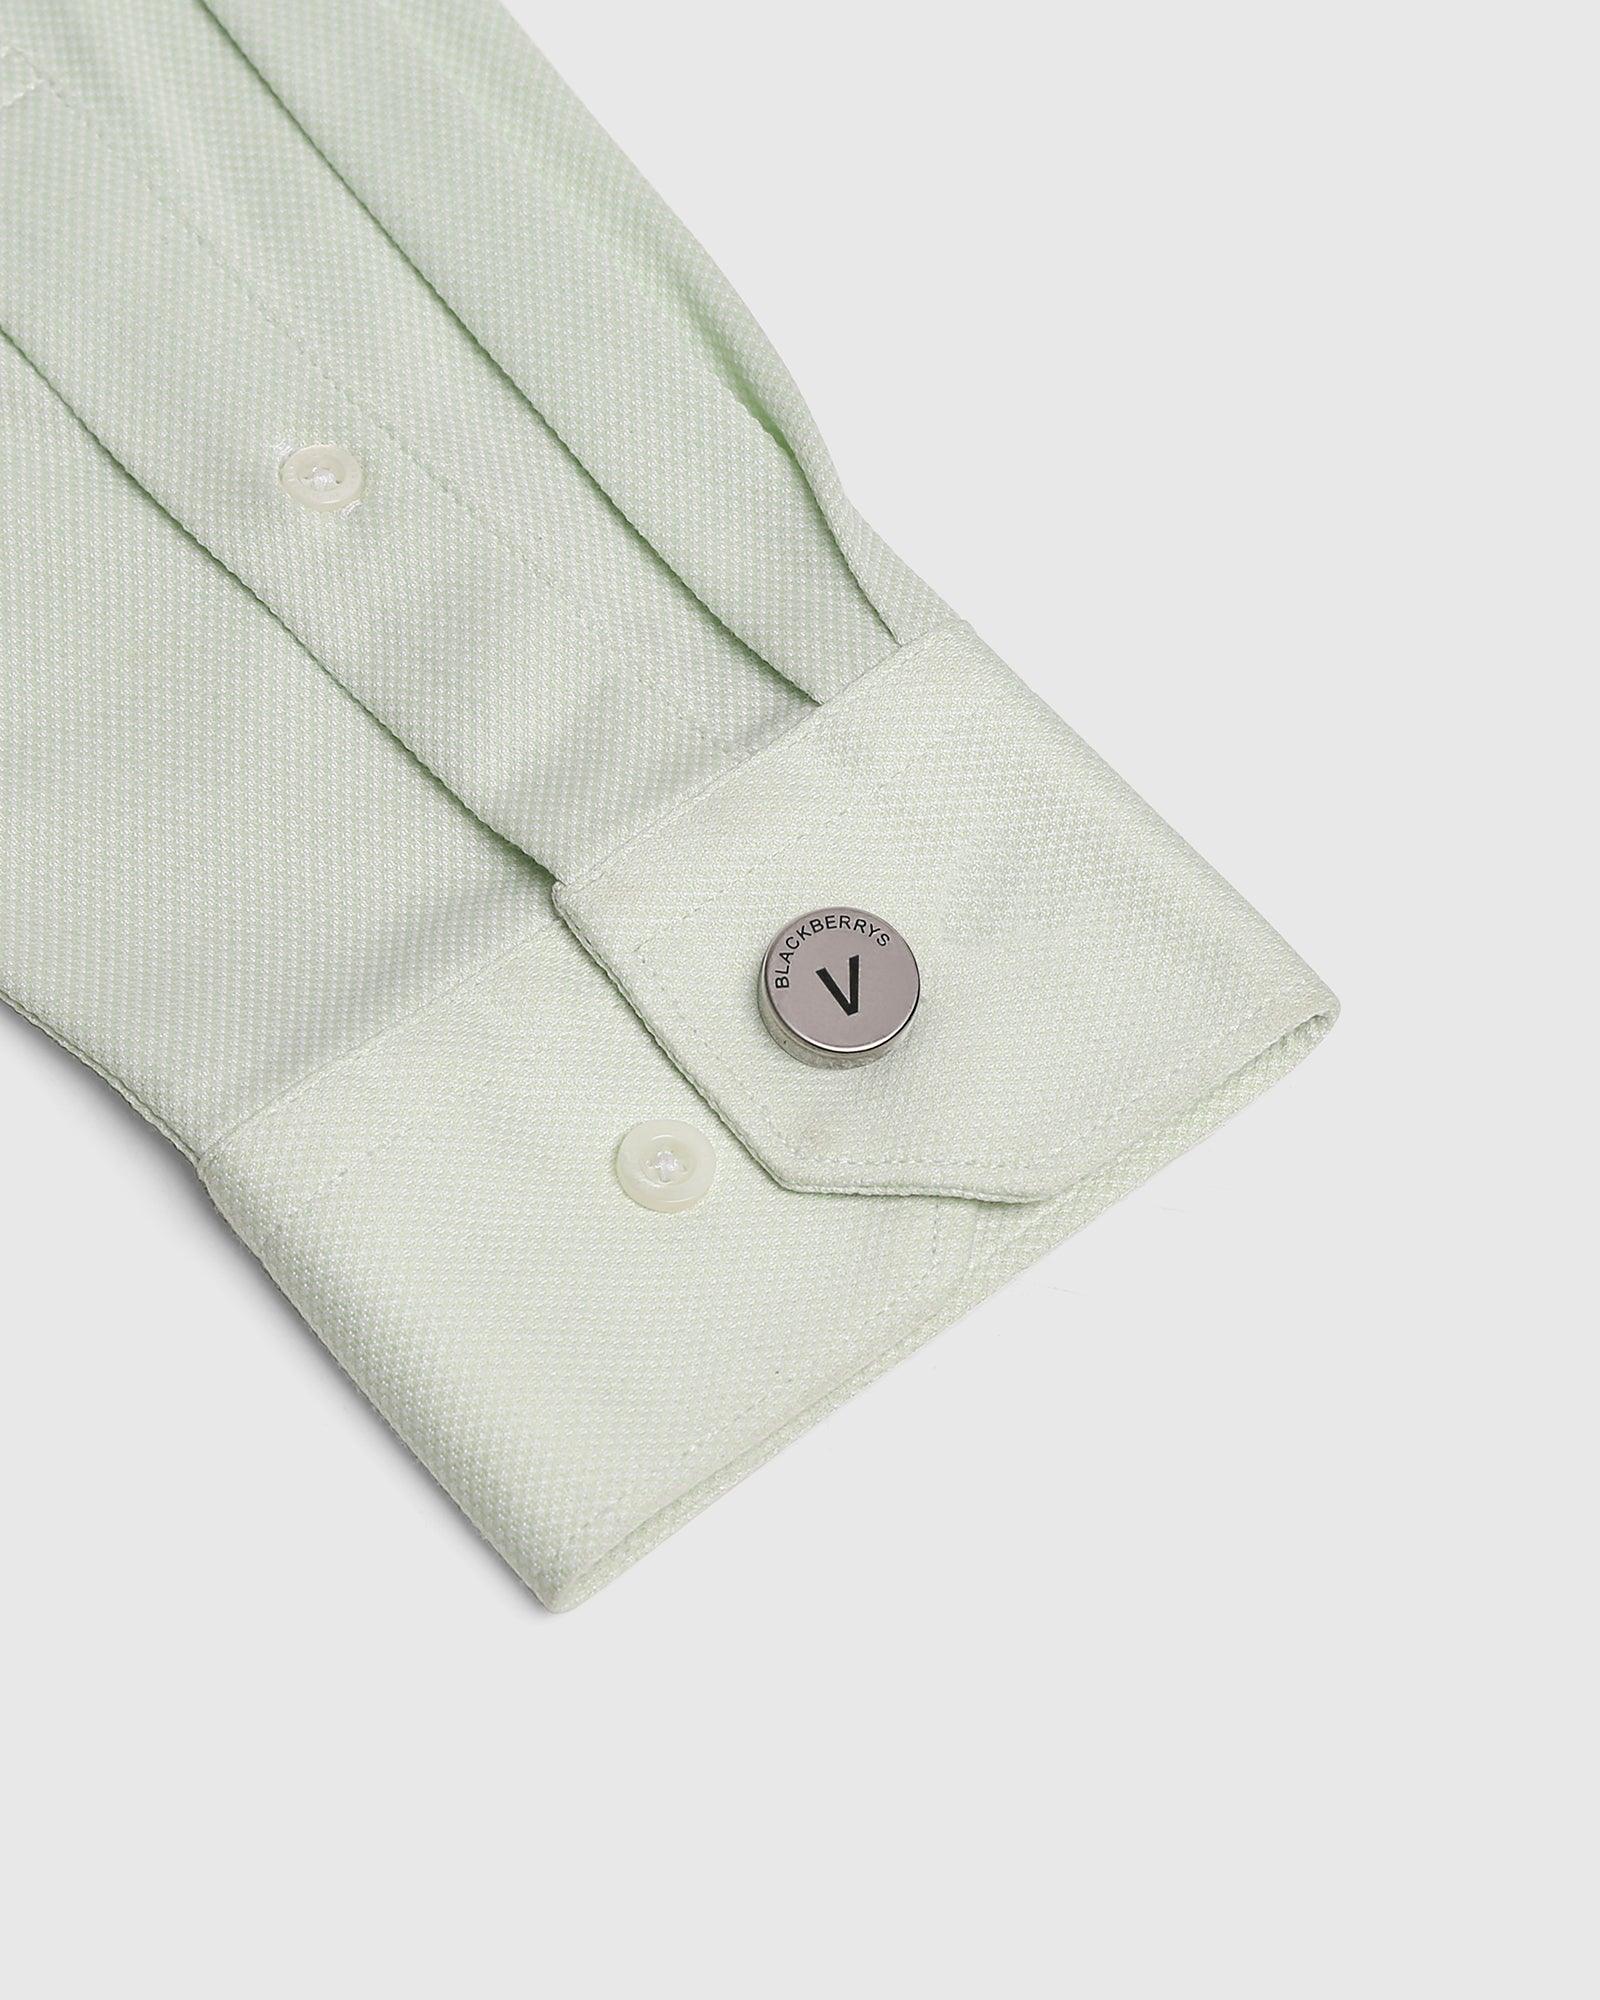 Personalised Shirt Button Cover With Alphabetic Initial-V